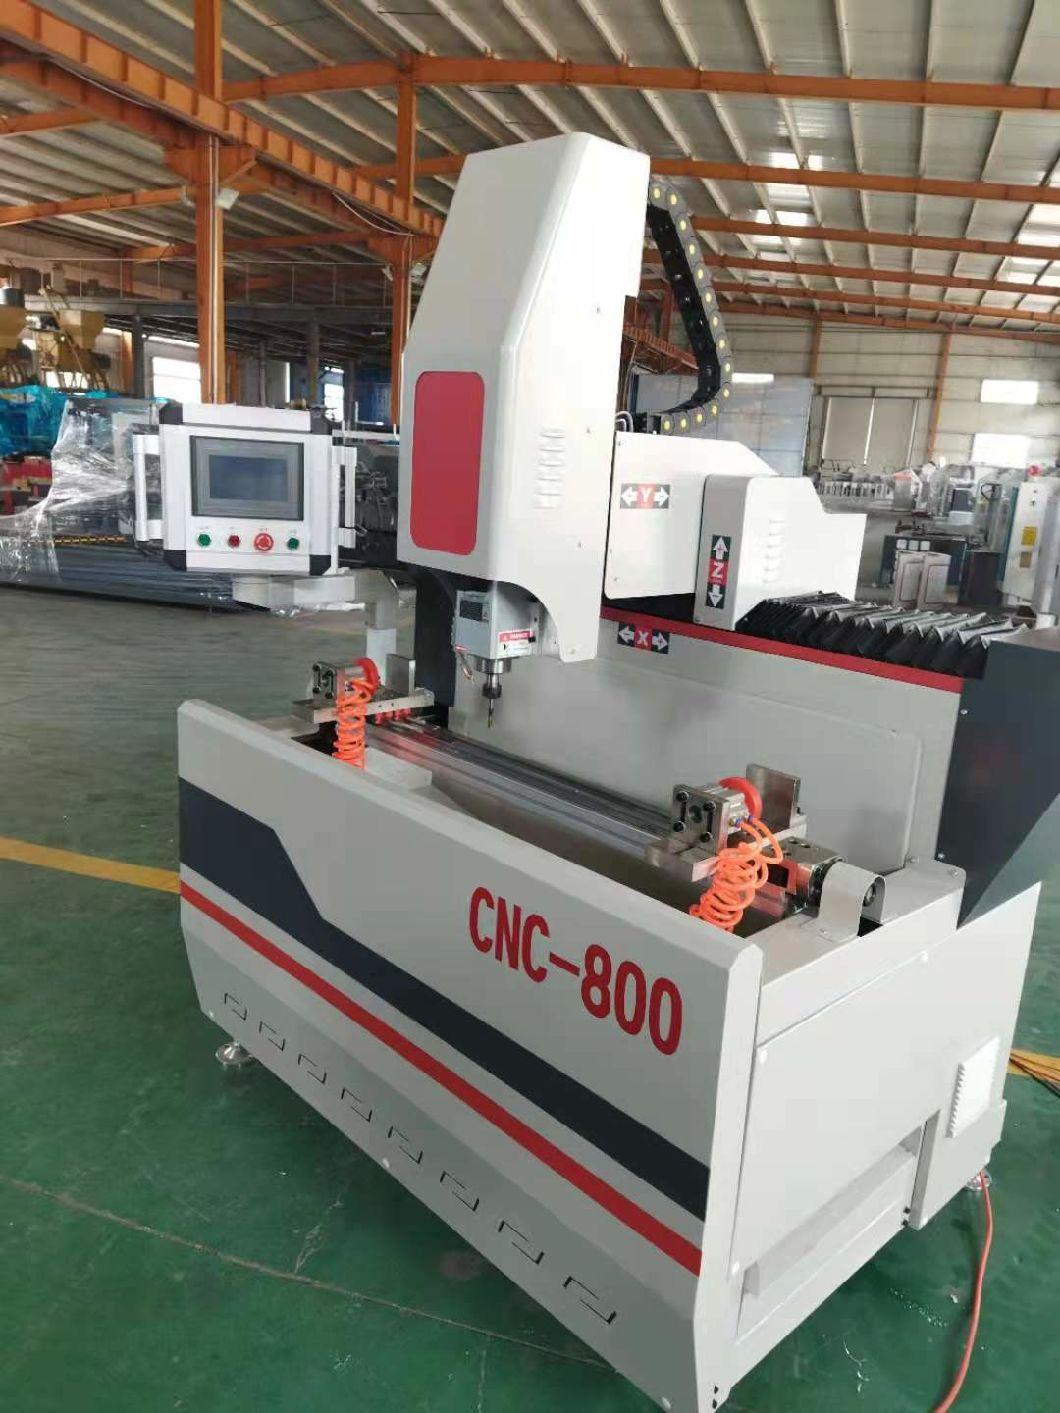 Lxf-CNC-800 CNC Drilling and Milling Machine for The Processing of Curtain Wall Aluminum Alloy Profile for Doors and Windows Making